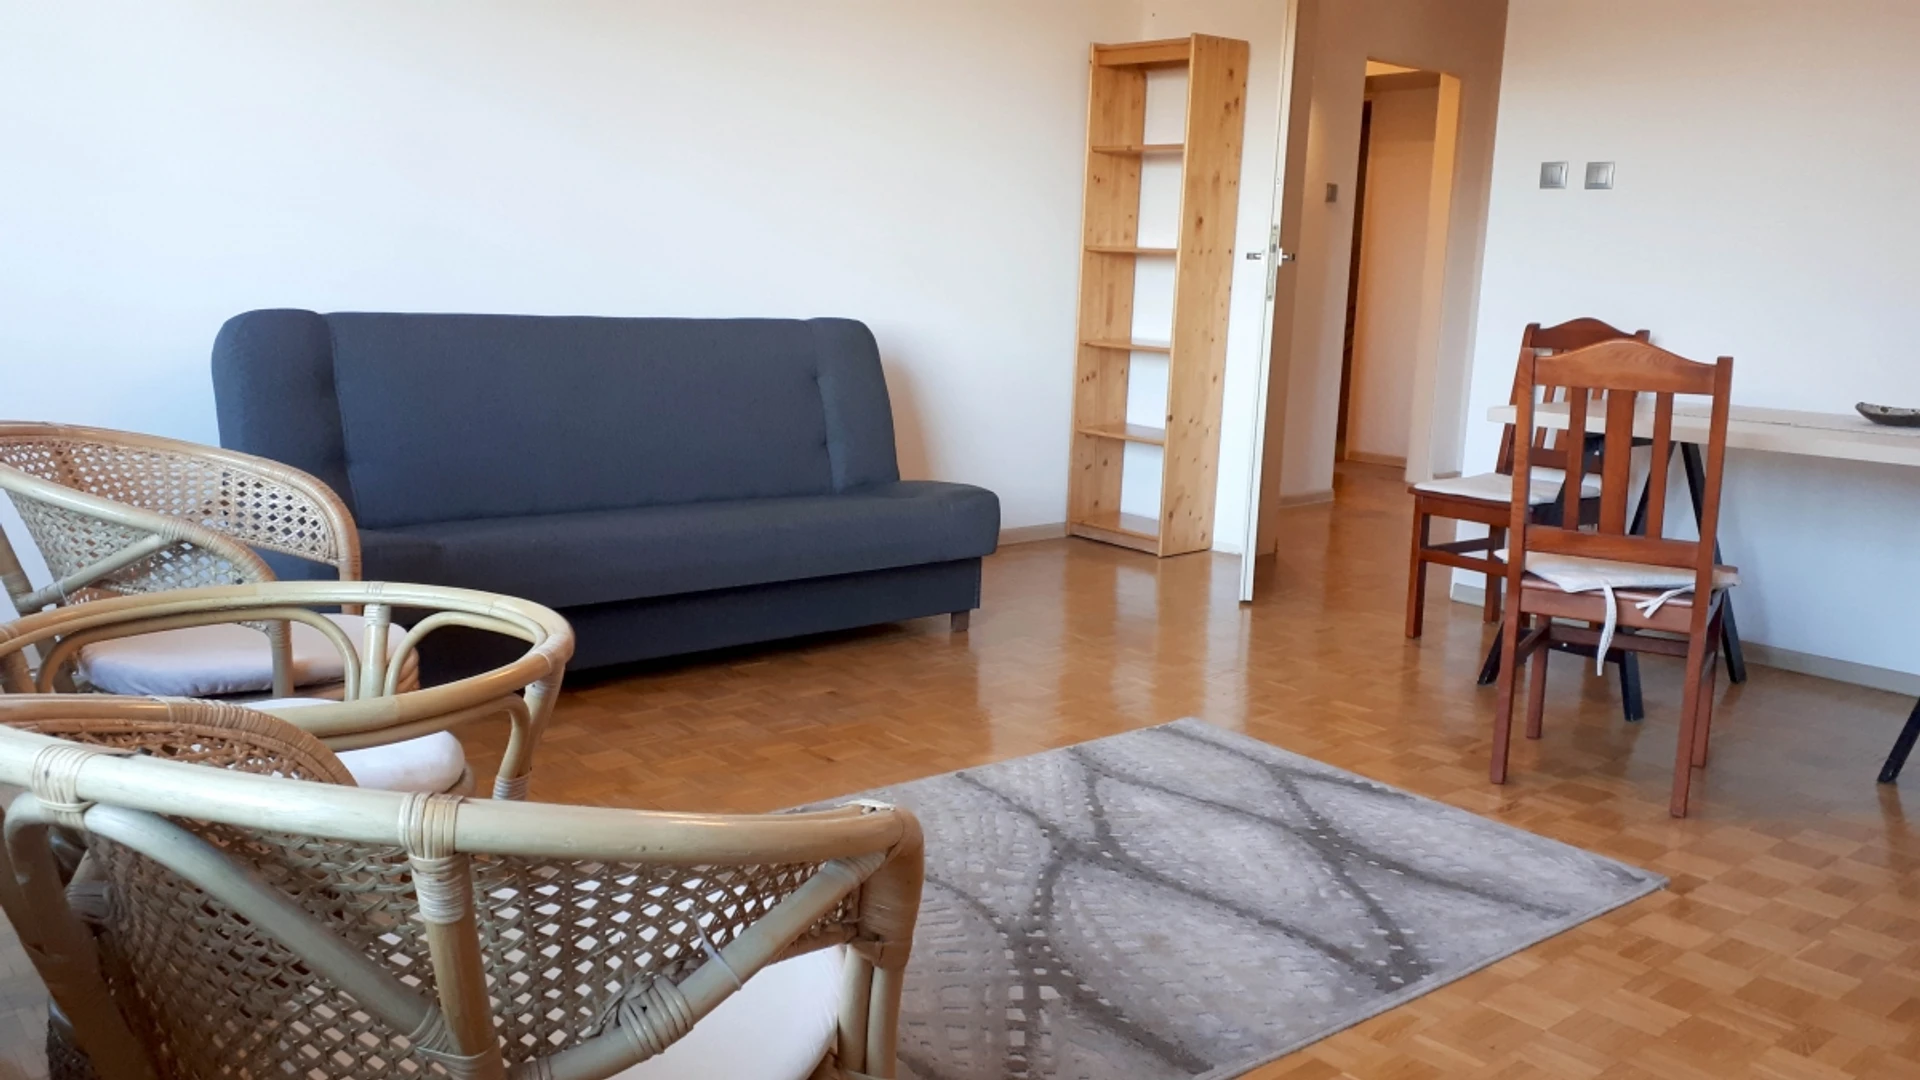 Room for rent with double bed Białystok